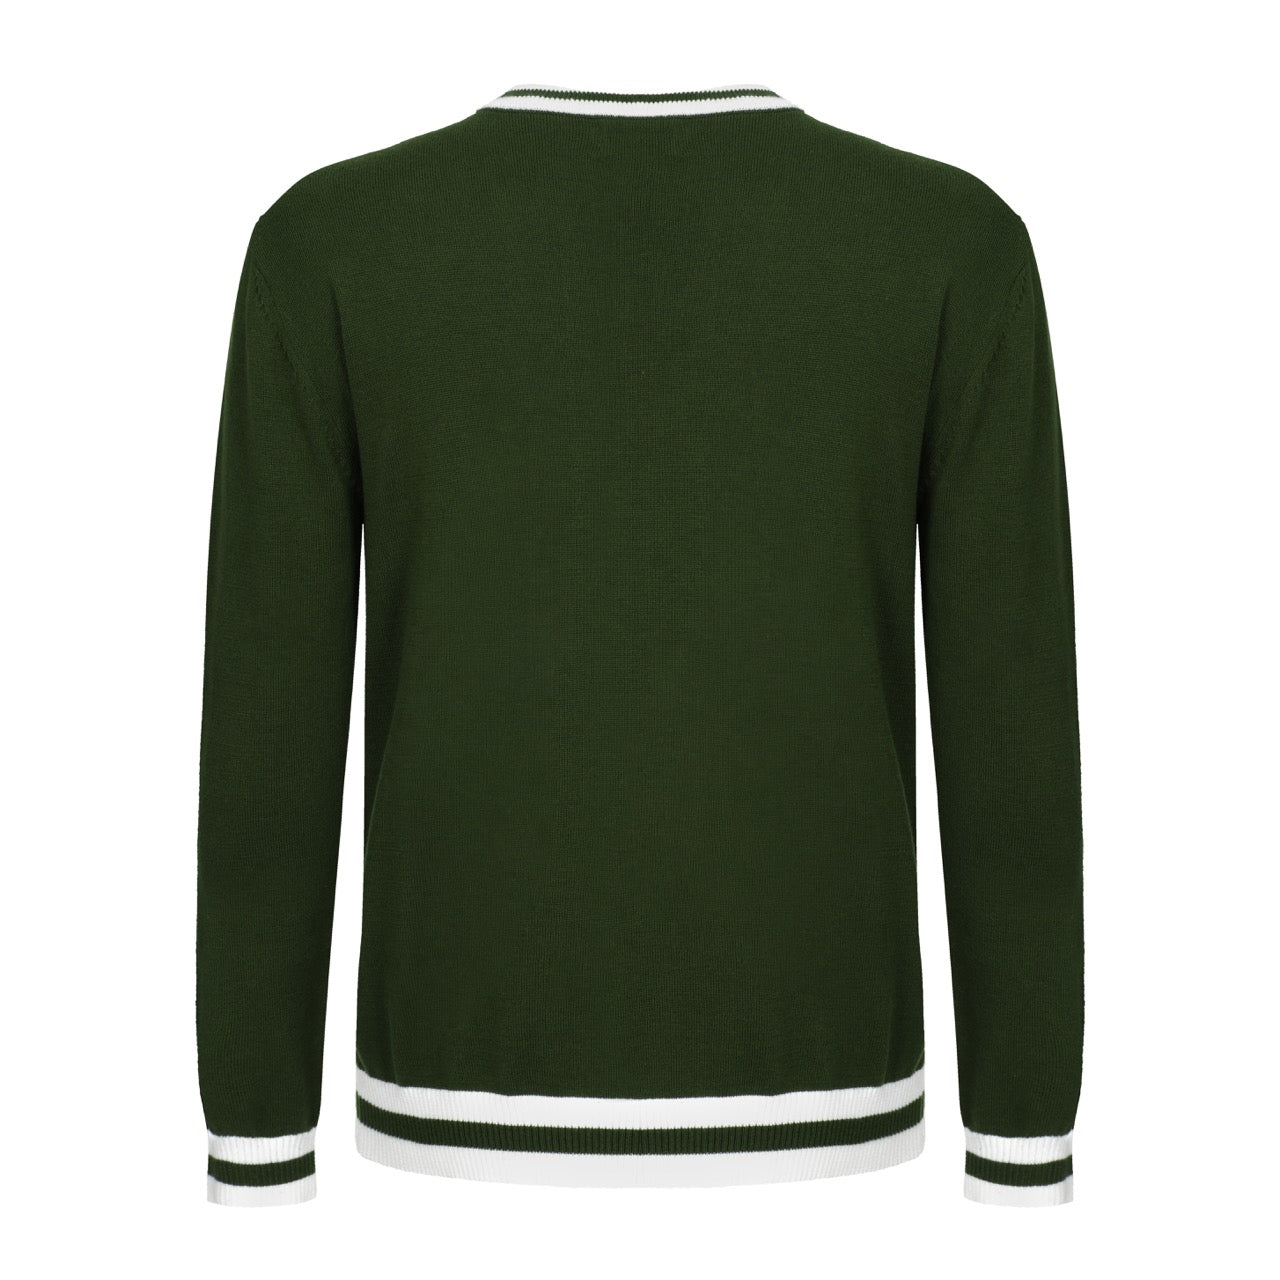 OXKNIT Men Vintage Clothing 1960s Mod Style Casual Army Green Knit Long Sleeve Solid Retro Tshirt